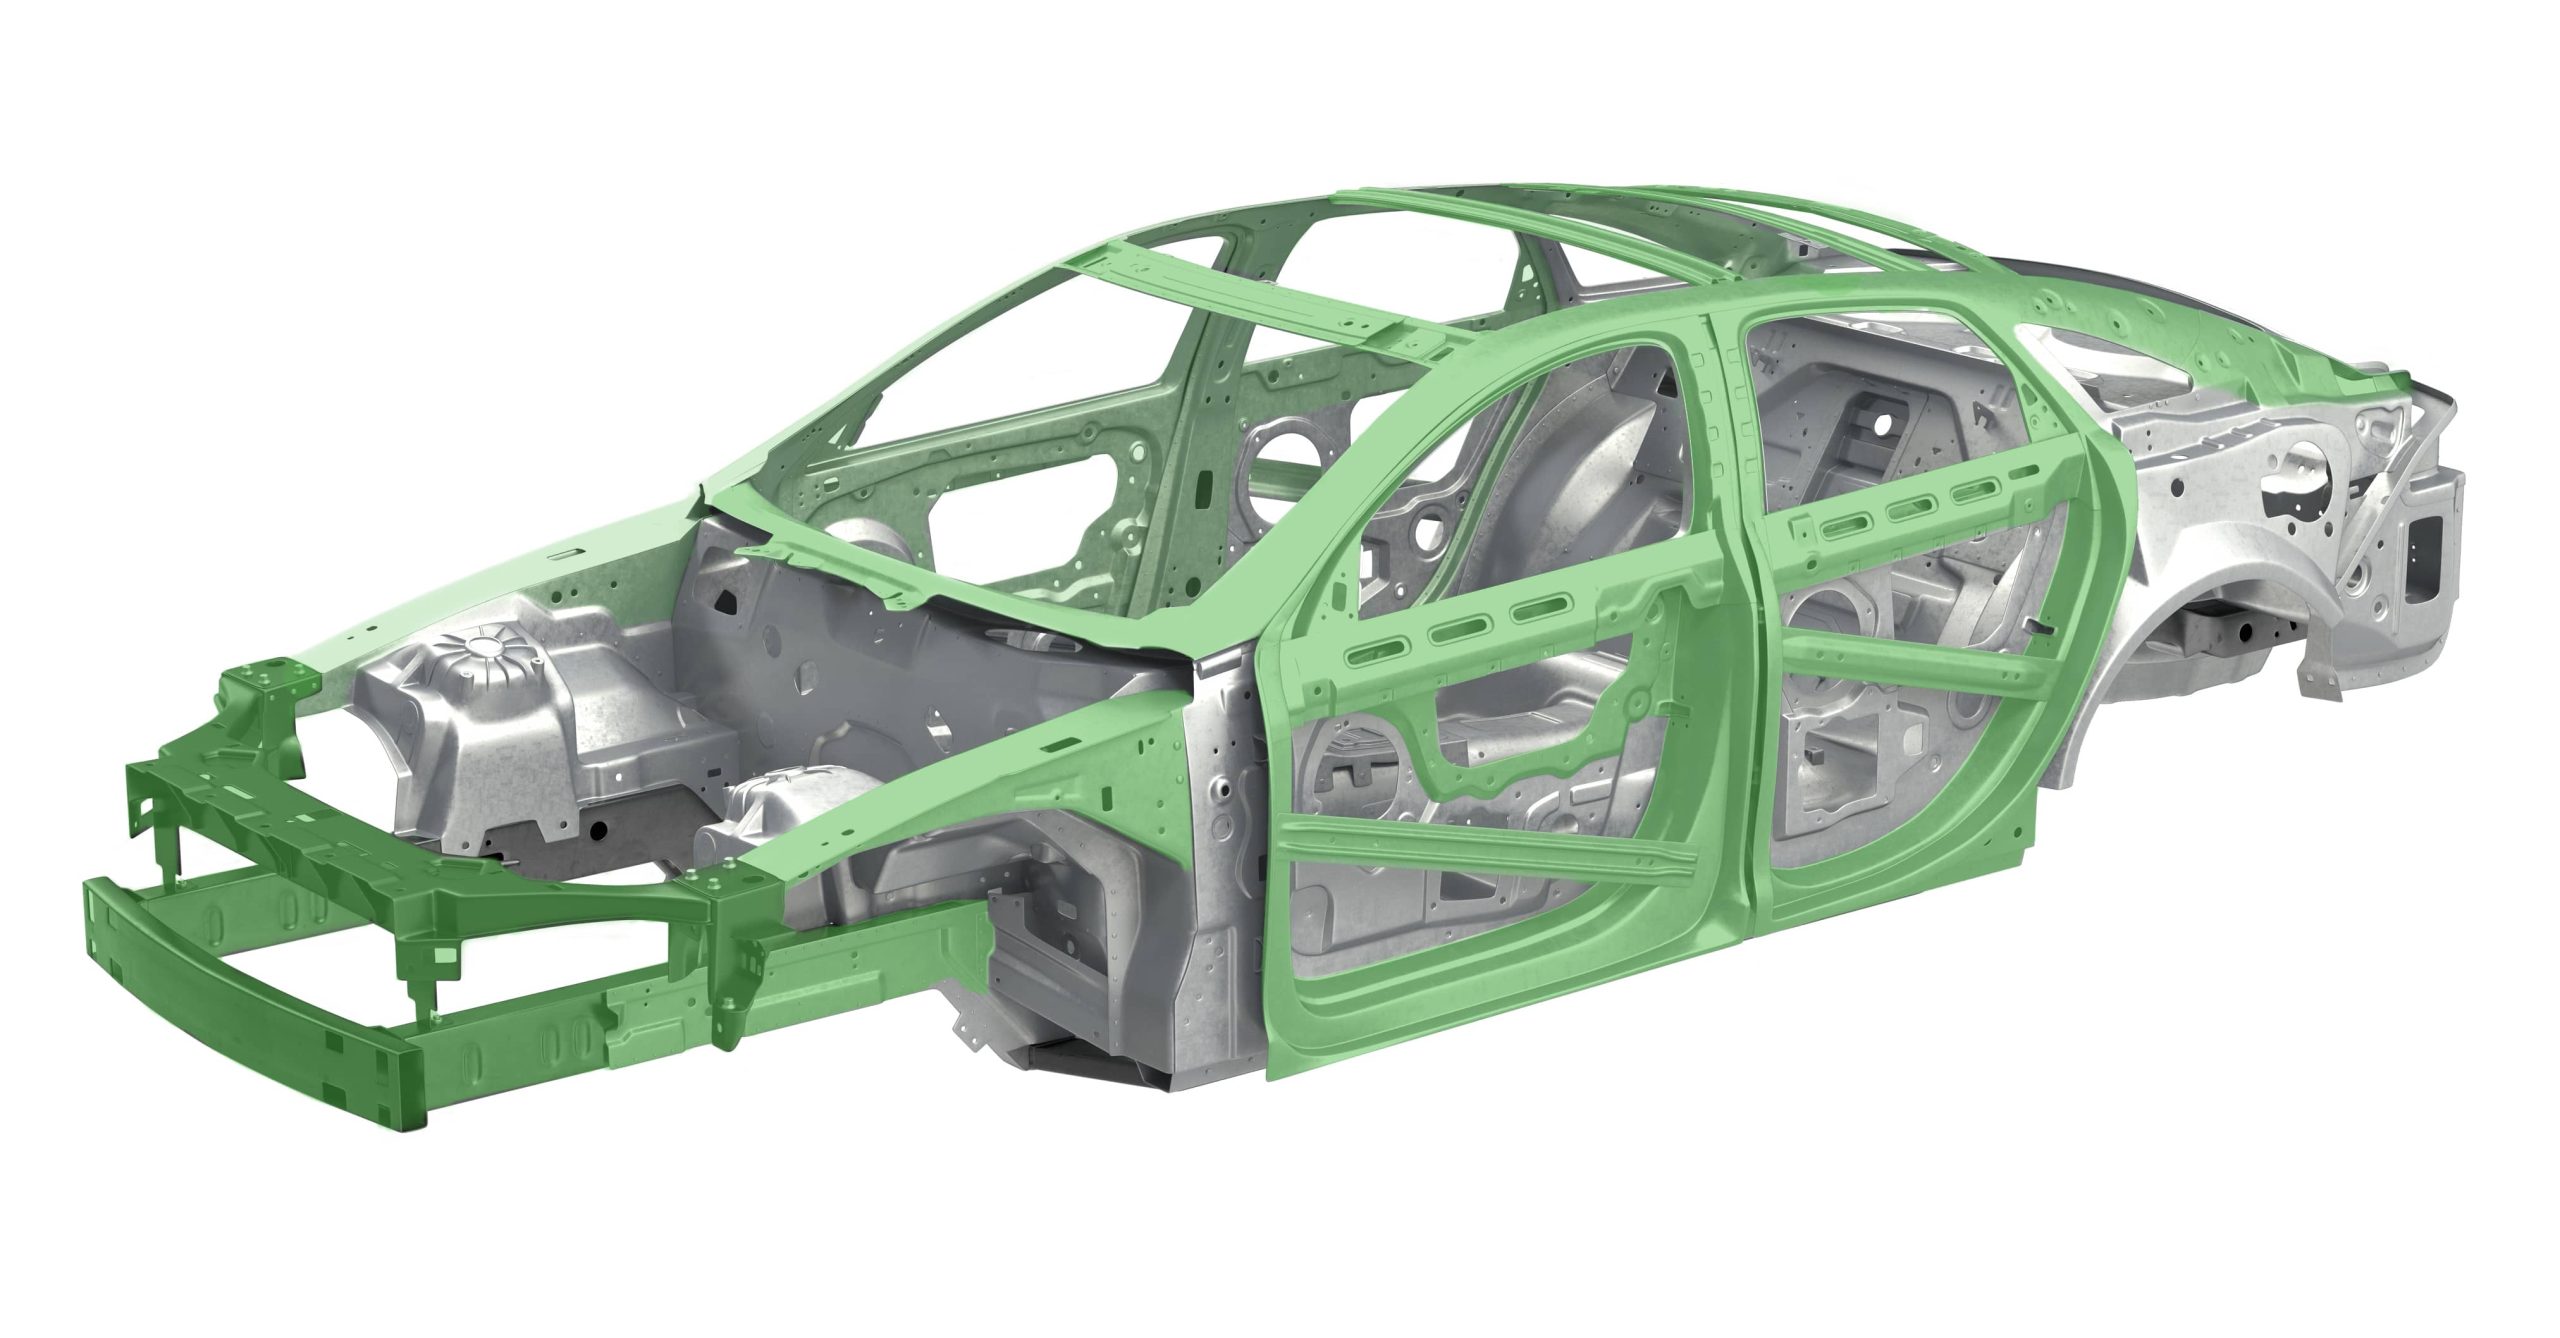 Light-weighting the automotive way: tailored fiber reinforcements on metal